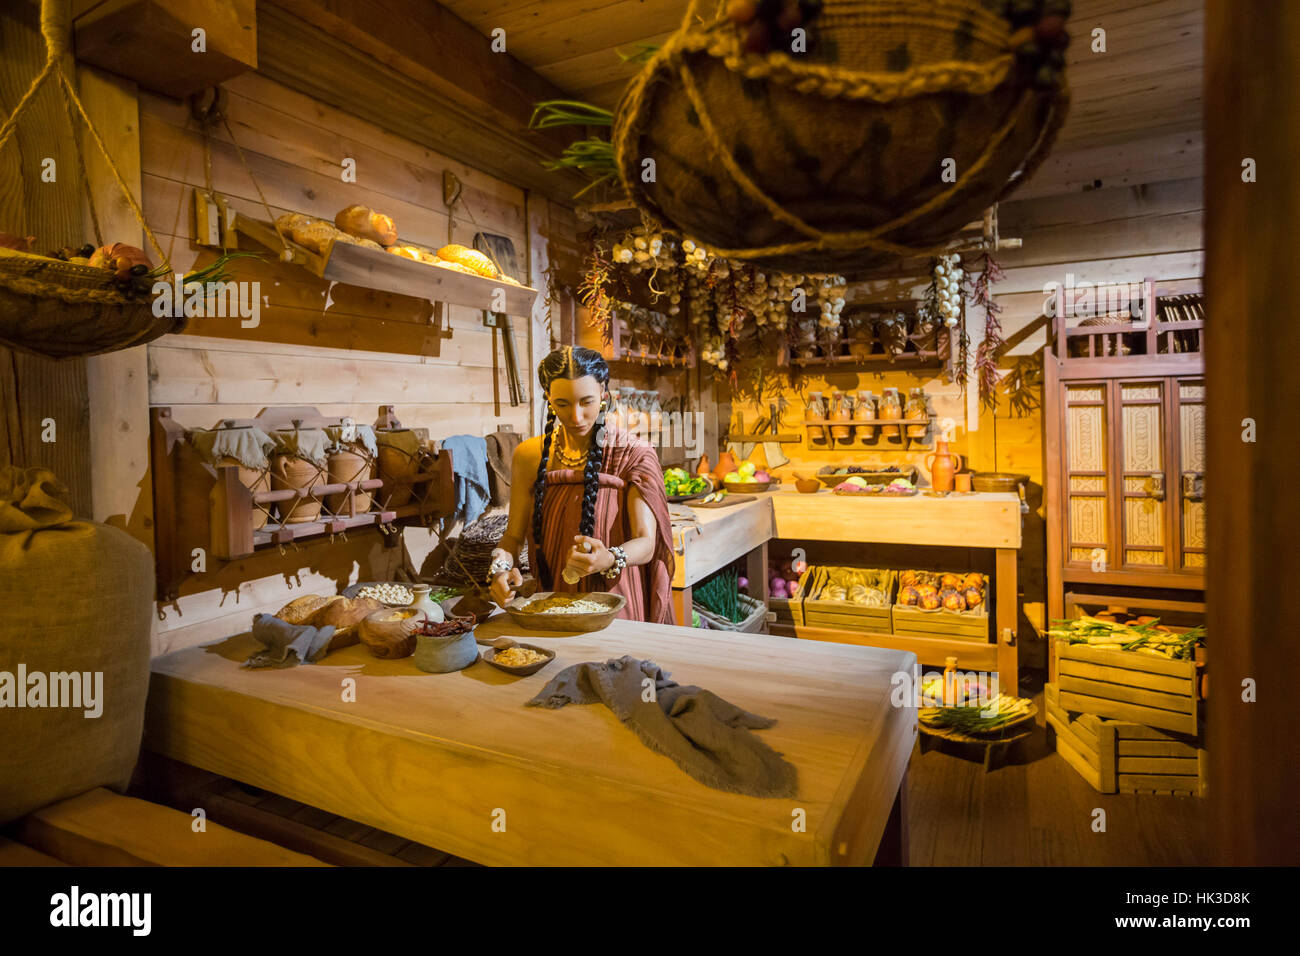 Williamstown Kentucky The Ark Encounter A Full Sized Model Of Noah S Ark Built By The Fundamentalist Christian Group Answers In Genesis Stock Photo Alamy